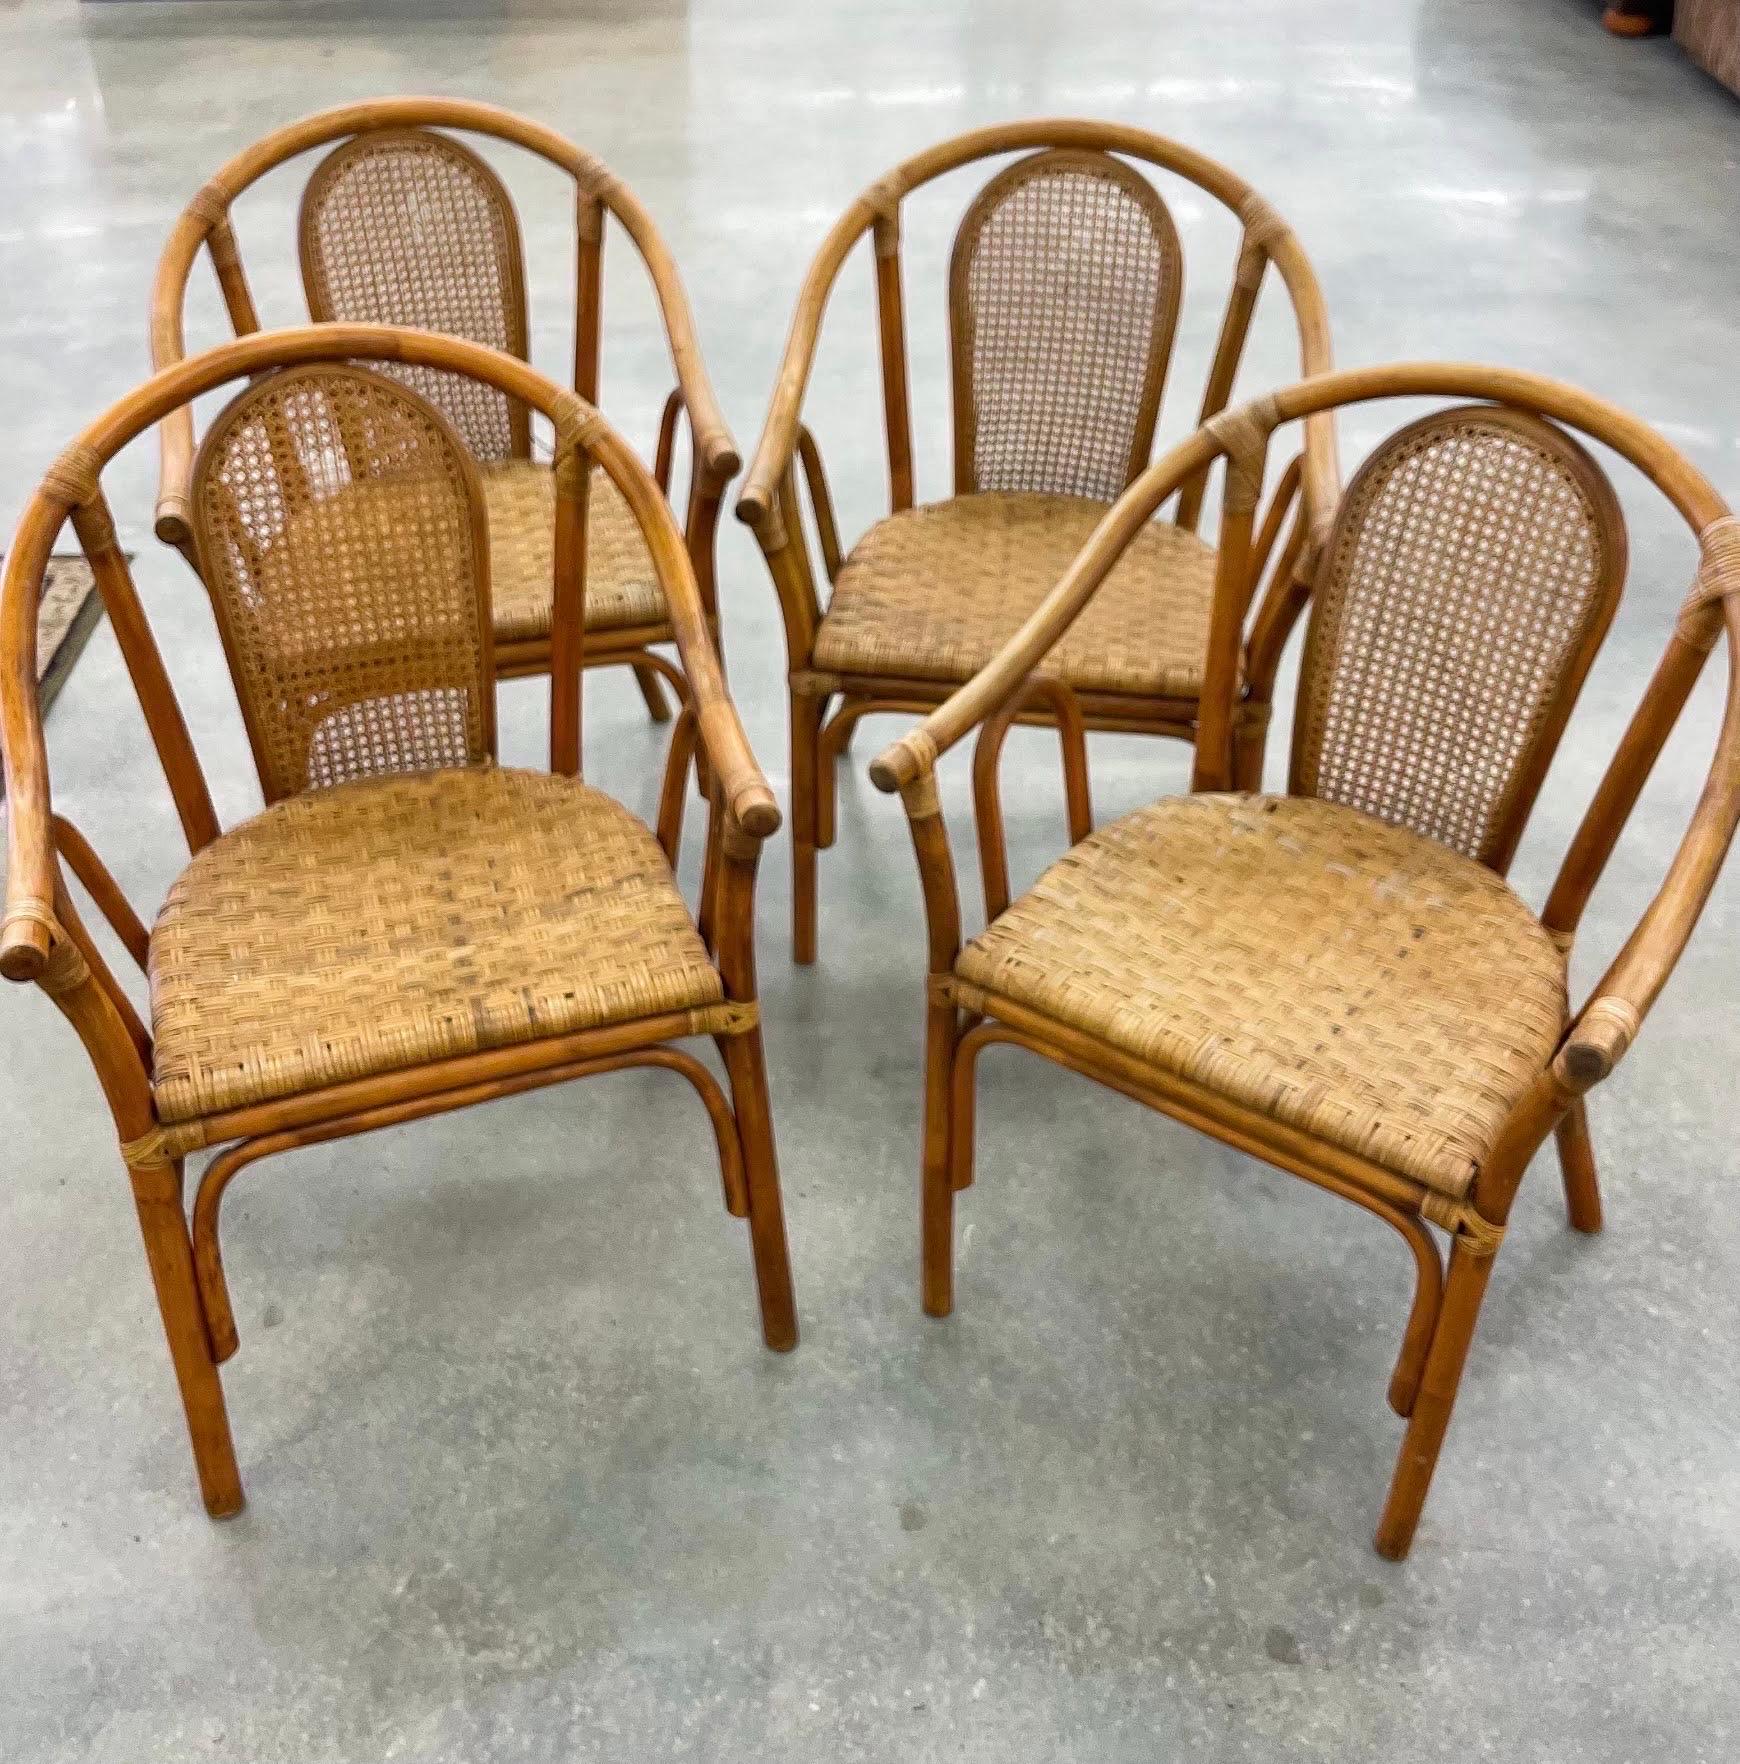 Mid 20th Century Bamboo Rattan Dining Chairs With Cane Inset Back - Set of 4 For Sale 6